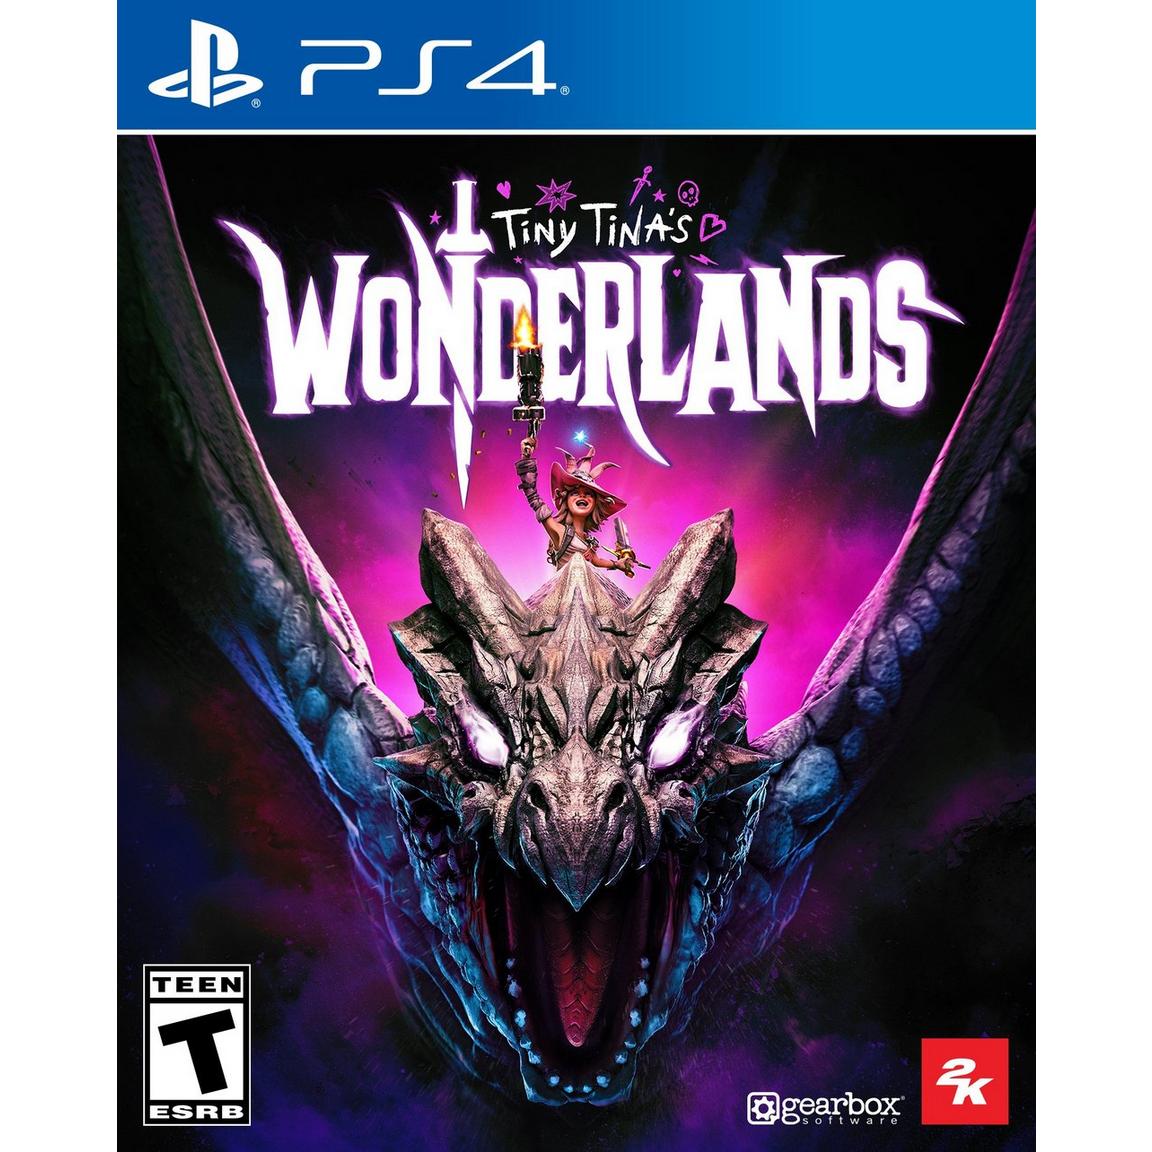 Tiny Tina's Wonderlands for PS4 & Xbox One is $44.99 at Multiple Retailers